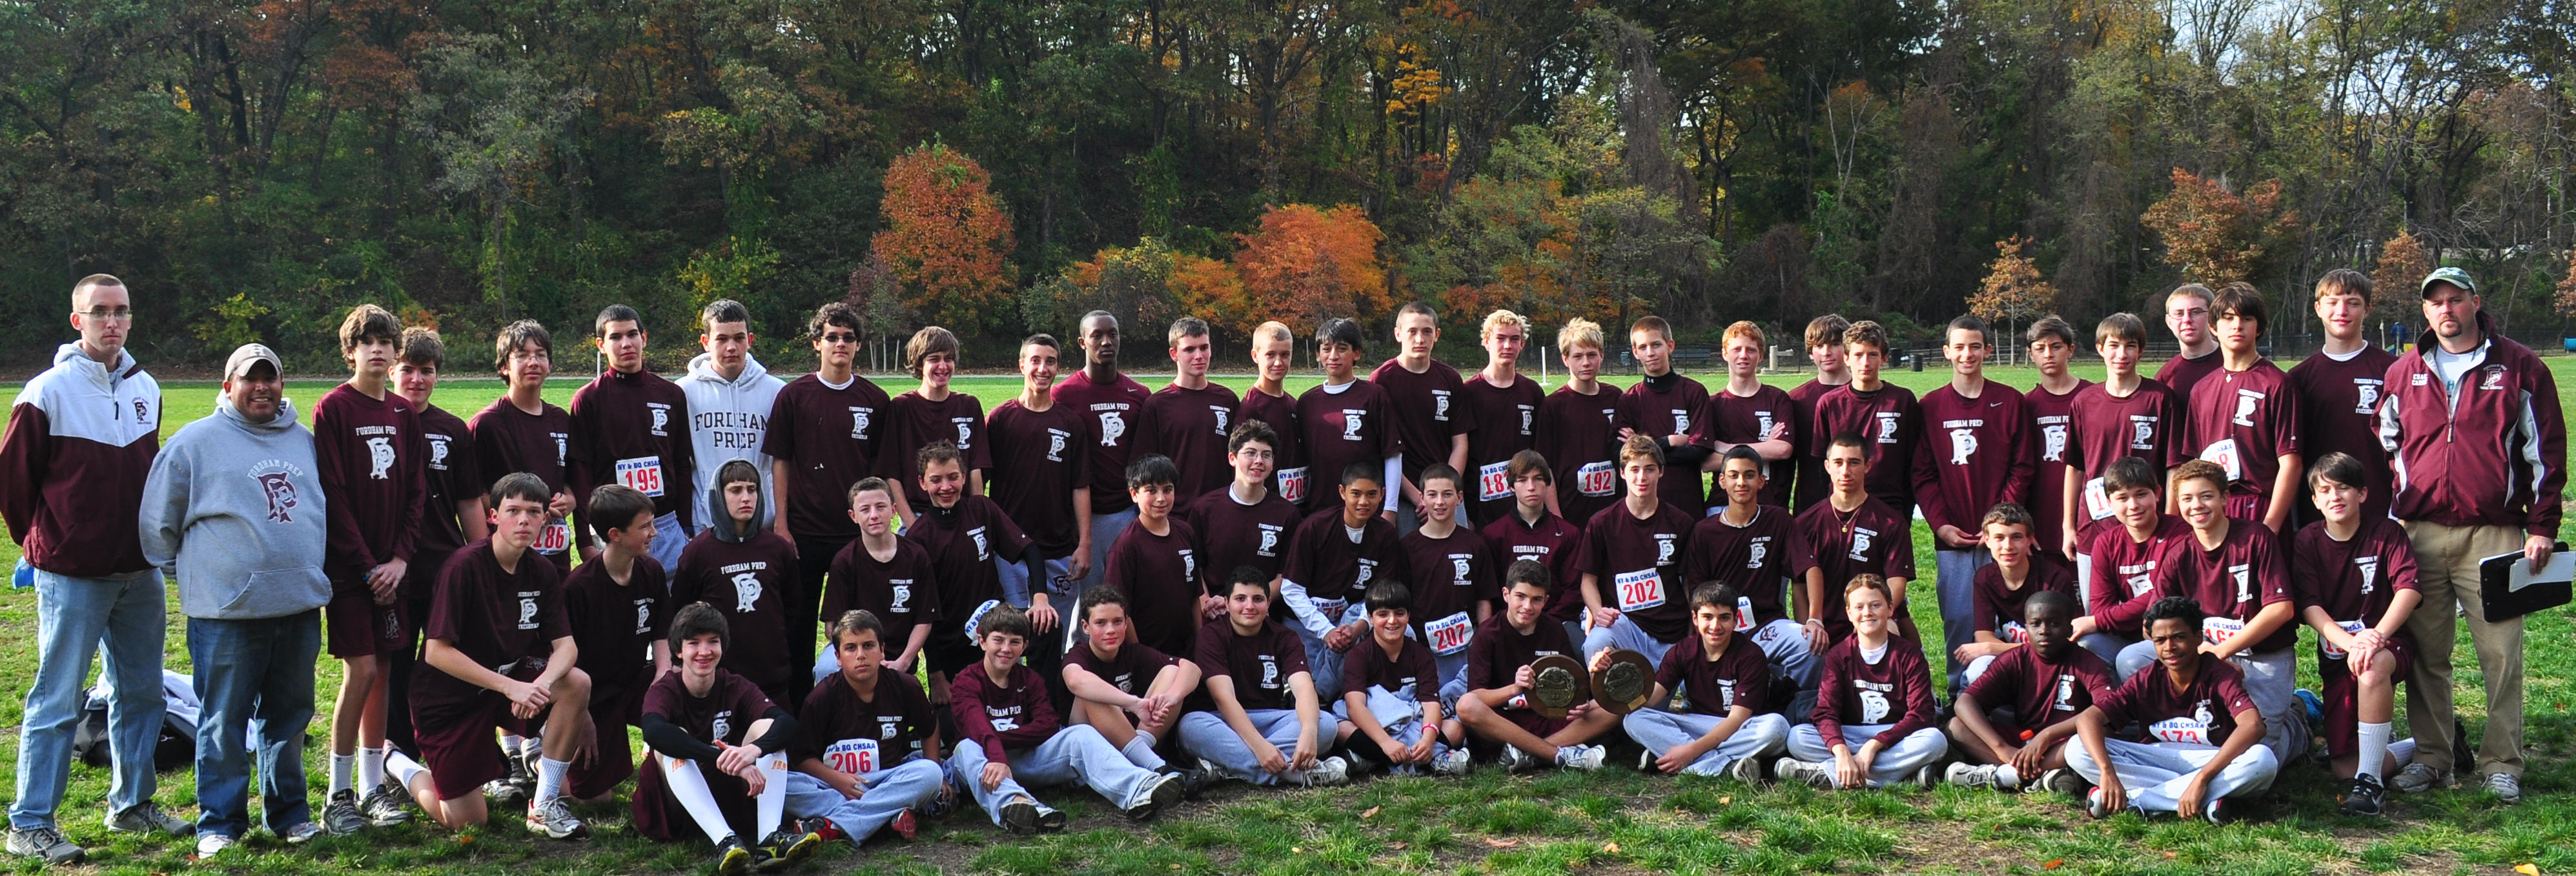 The 2010 NYCHSAA Freshman Cross Country Champions, decked out in their new maroon uniforms